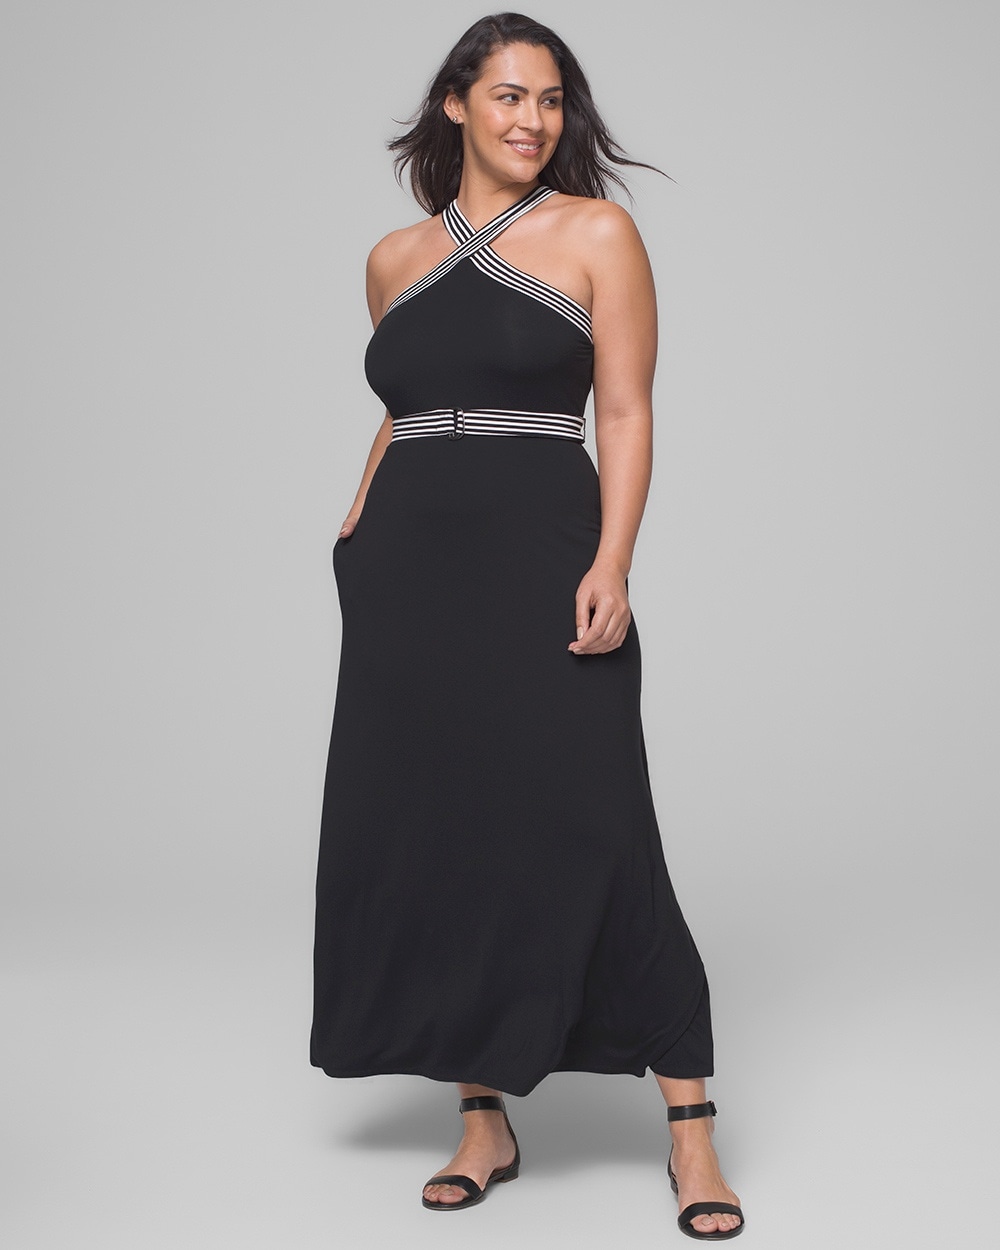 Belted Maxi Dress with Built-In Bra